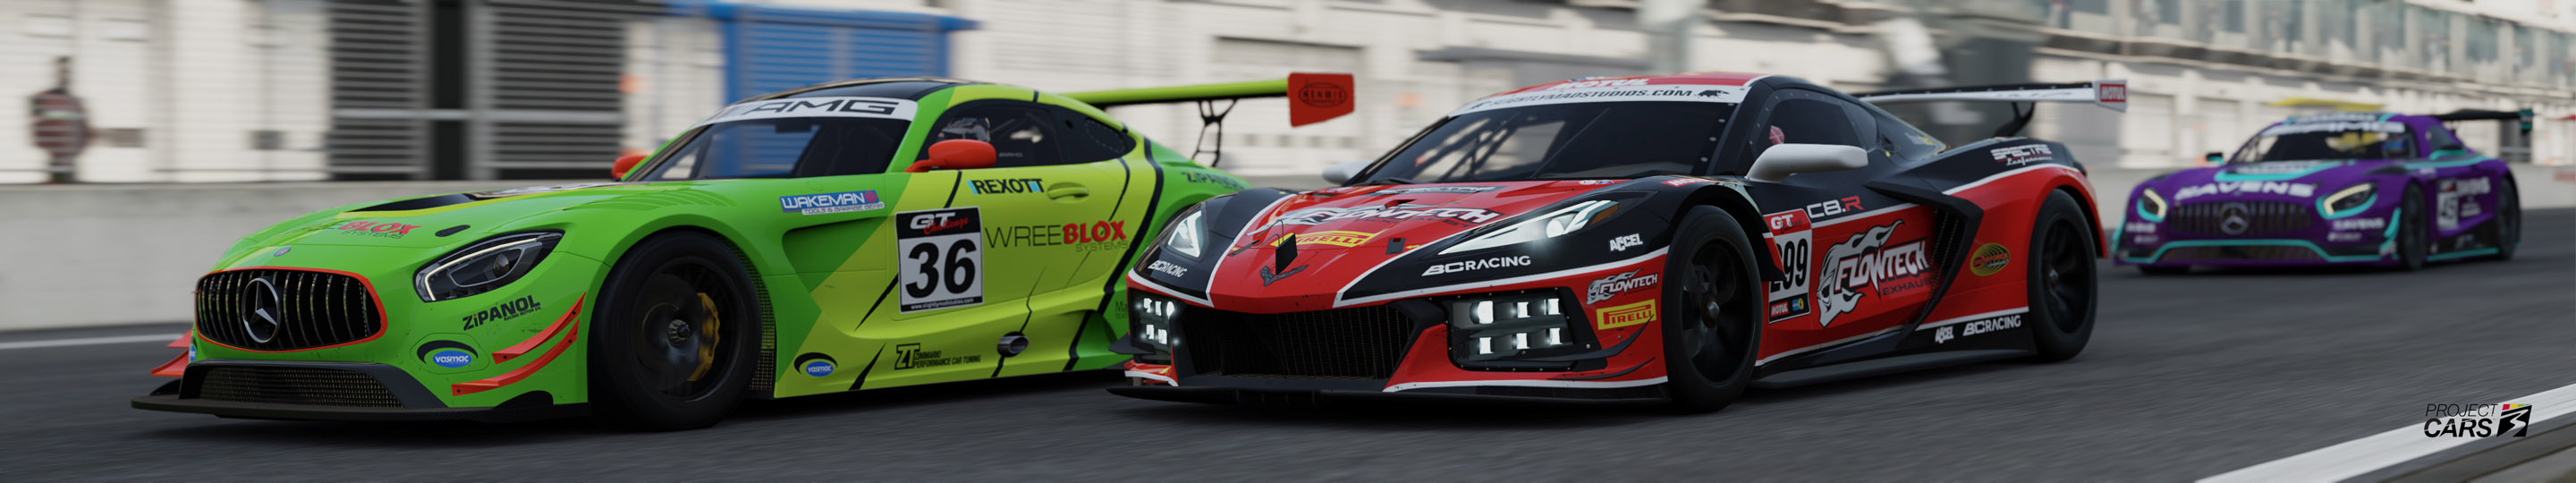 2 PROJECT CARS 3 GT3 at NORDSCHLEIFE copy.jpg